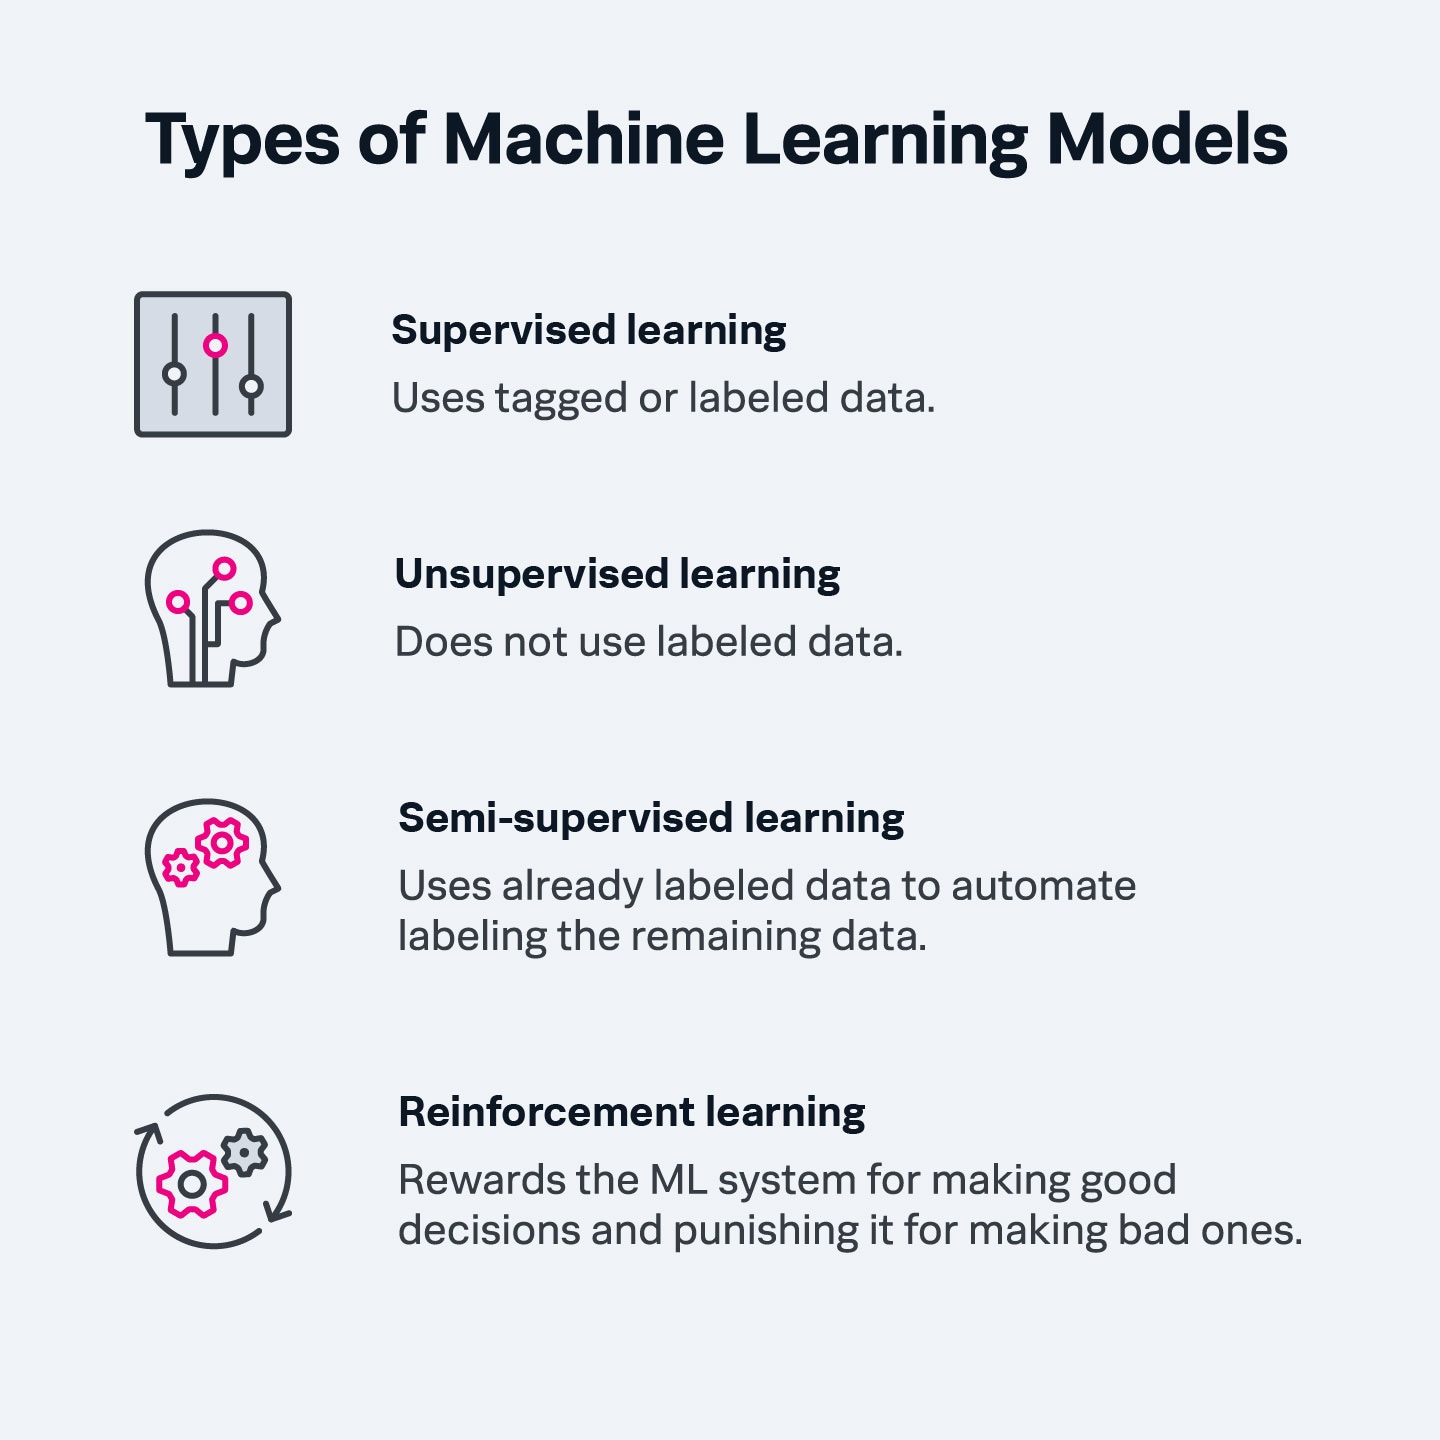 A simple chart that lists the four types of machine learning models